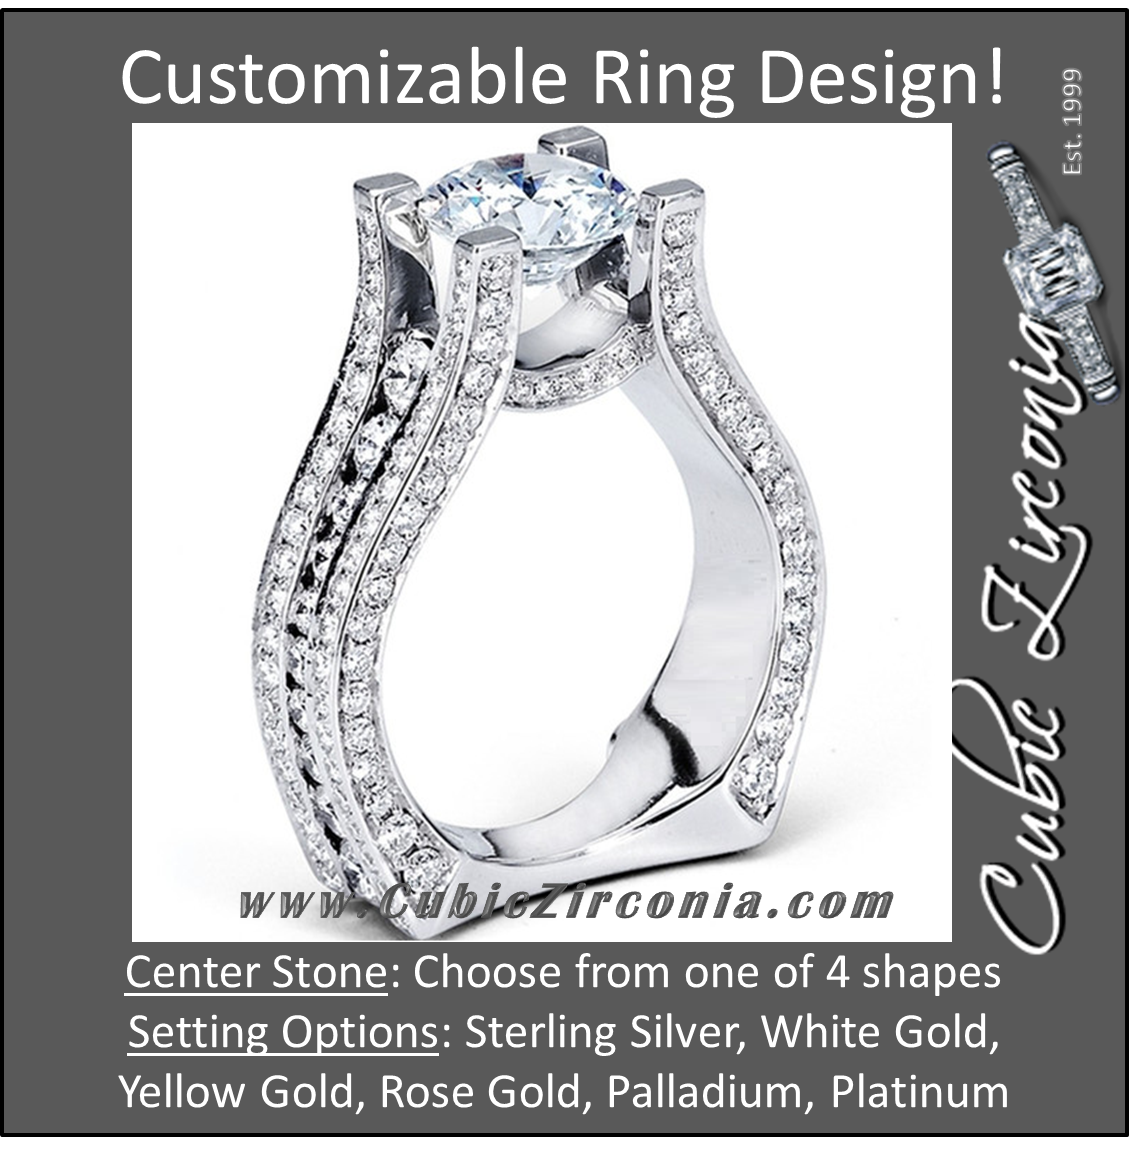 Cubic Zirconia Engagement Ring- The Alina (3 Carat European-style Pave)